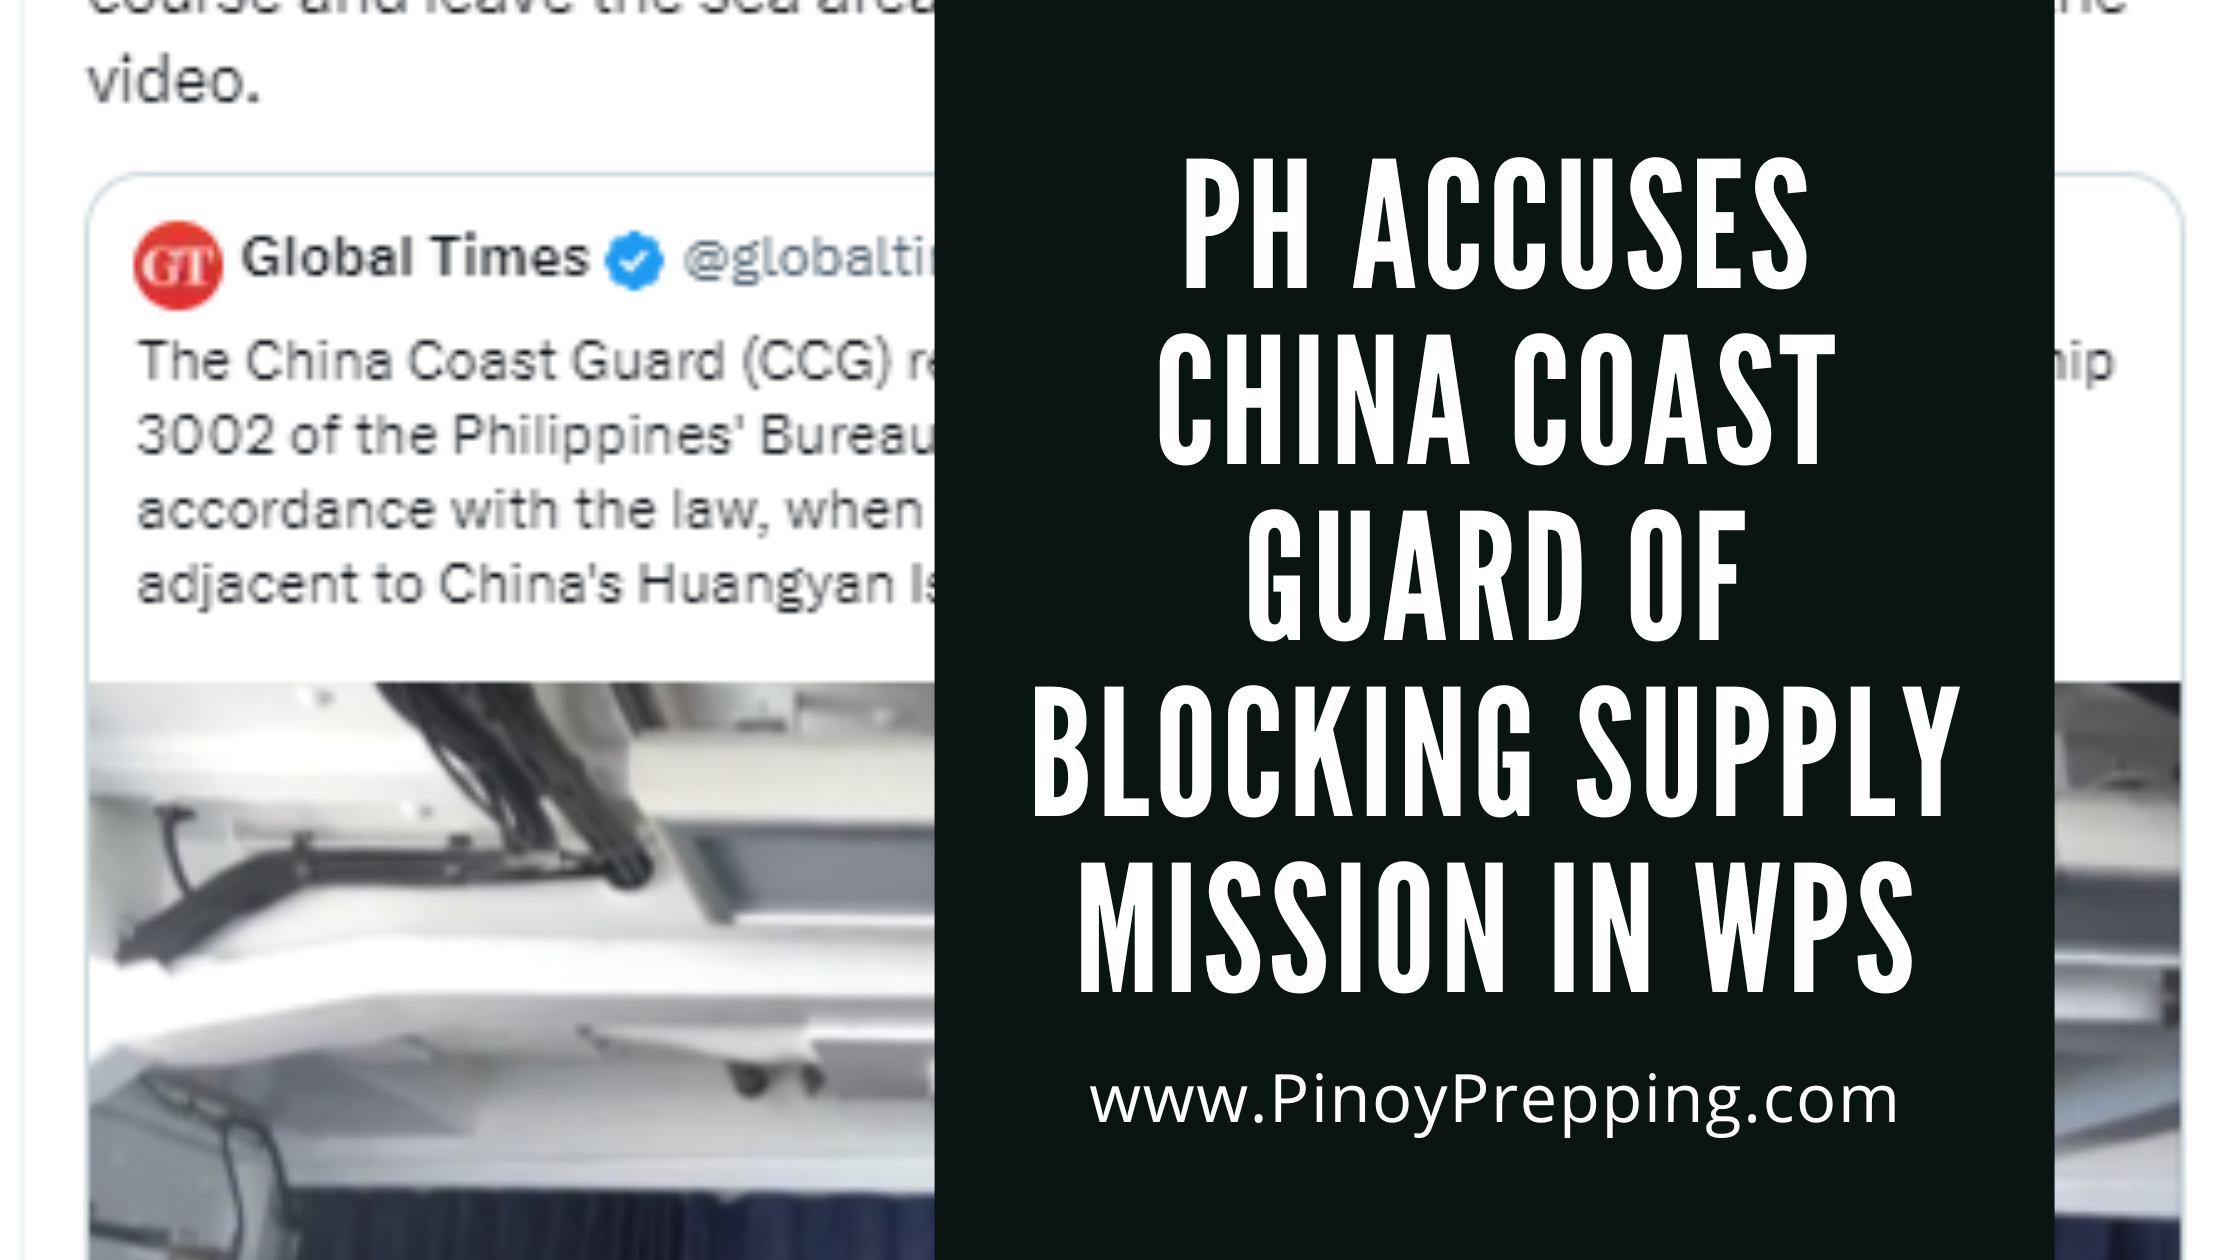 PH Accuses China Coast Guard of Blocking Supply Mission in WPS